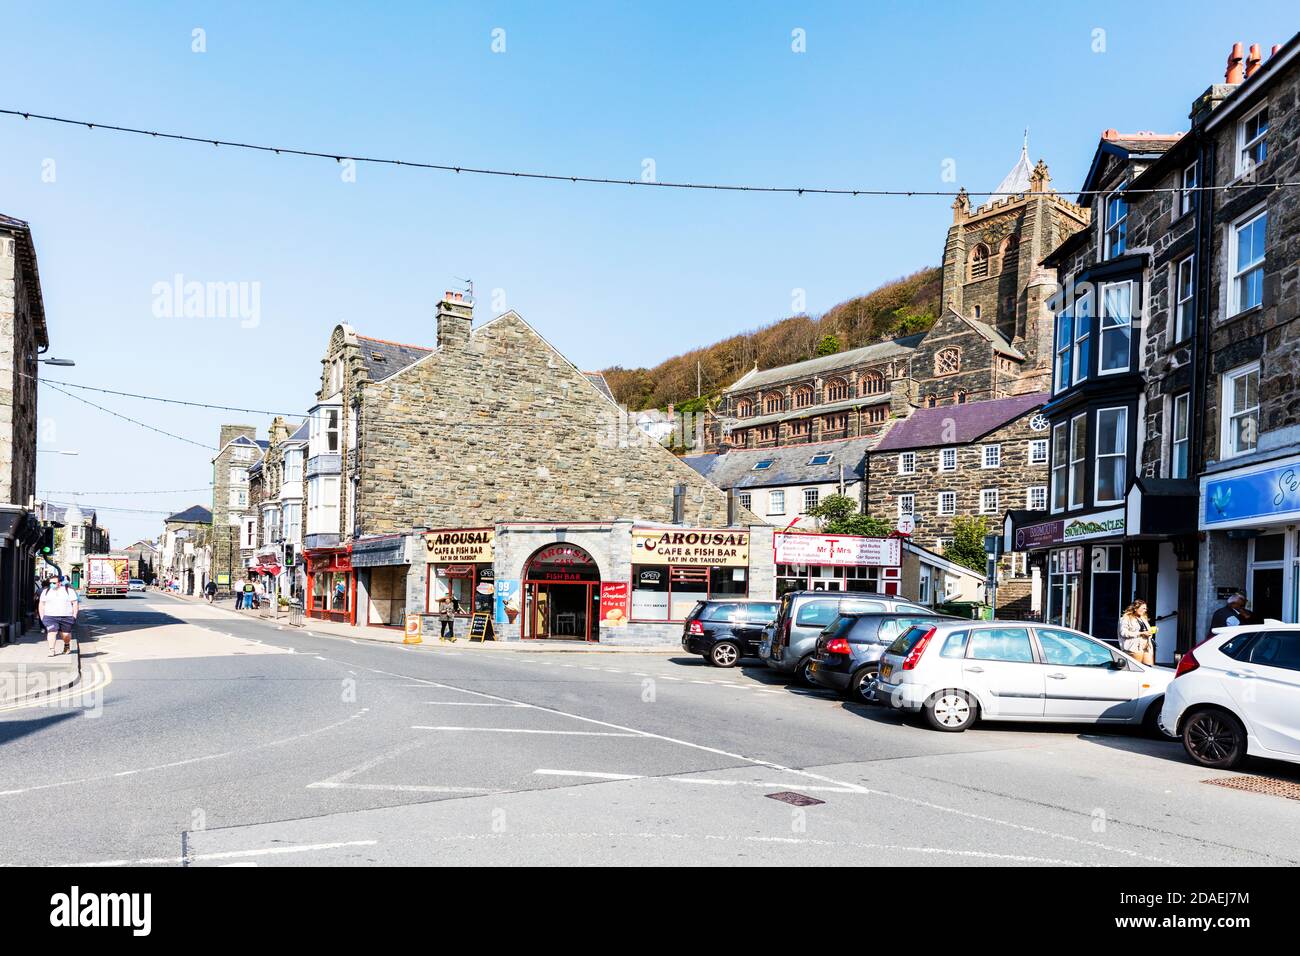 Barmouth is a seaside town and community in the county of Gwynedd, north-western Wales, Barmouth, Wales, UK, Barmouth town, Barmouth Wales, barmouth Stock Photo